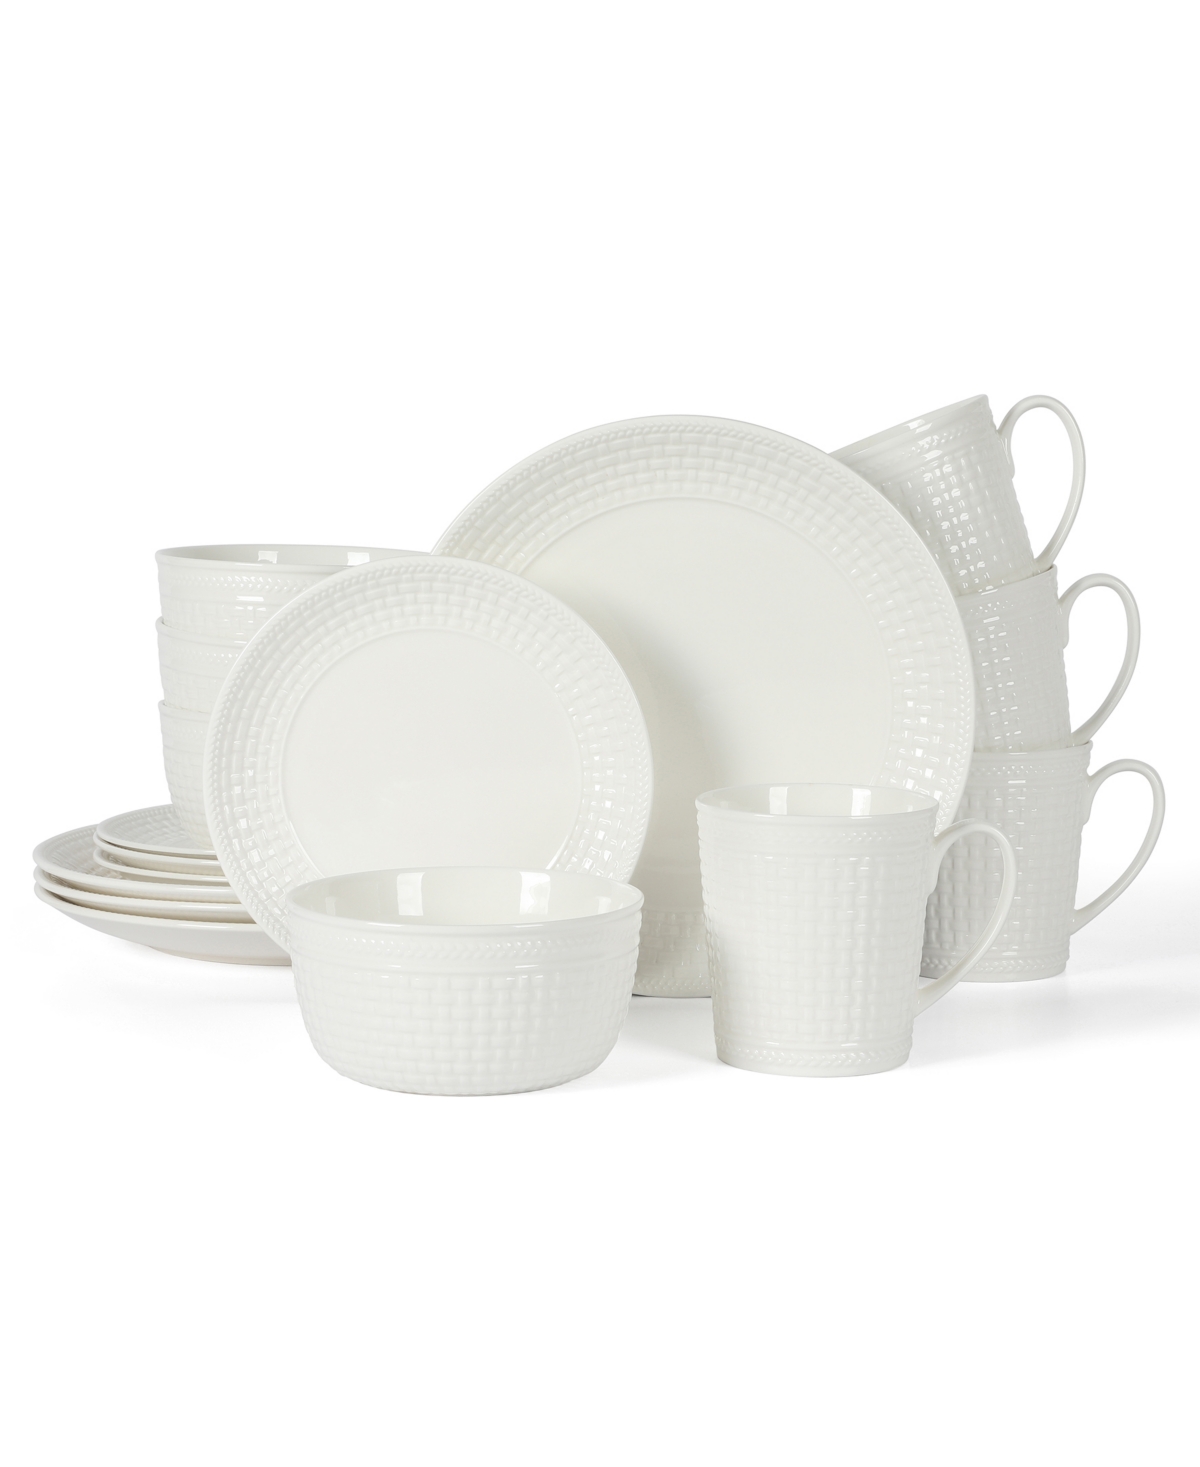 Basket Weave Embossed 16 Piece Dinnerware Set, Service for 4 - White